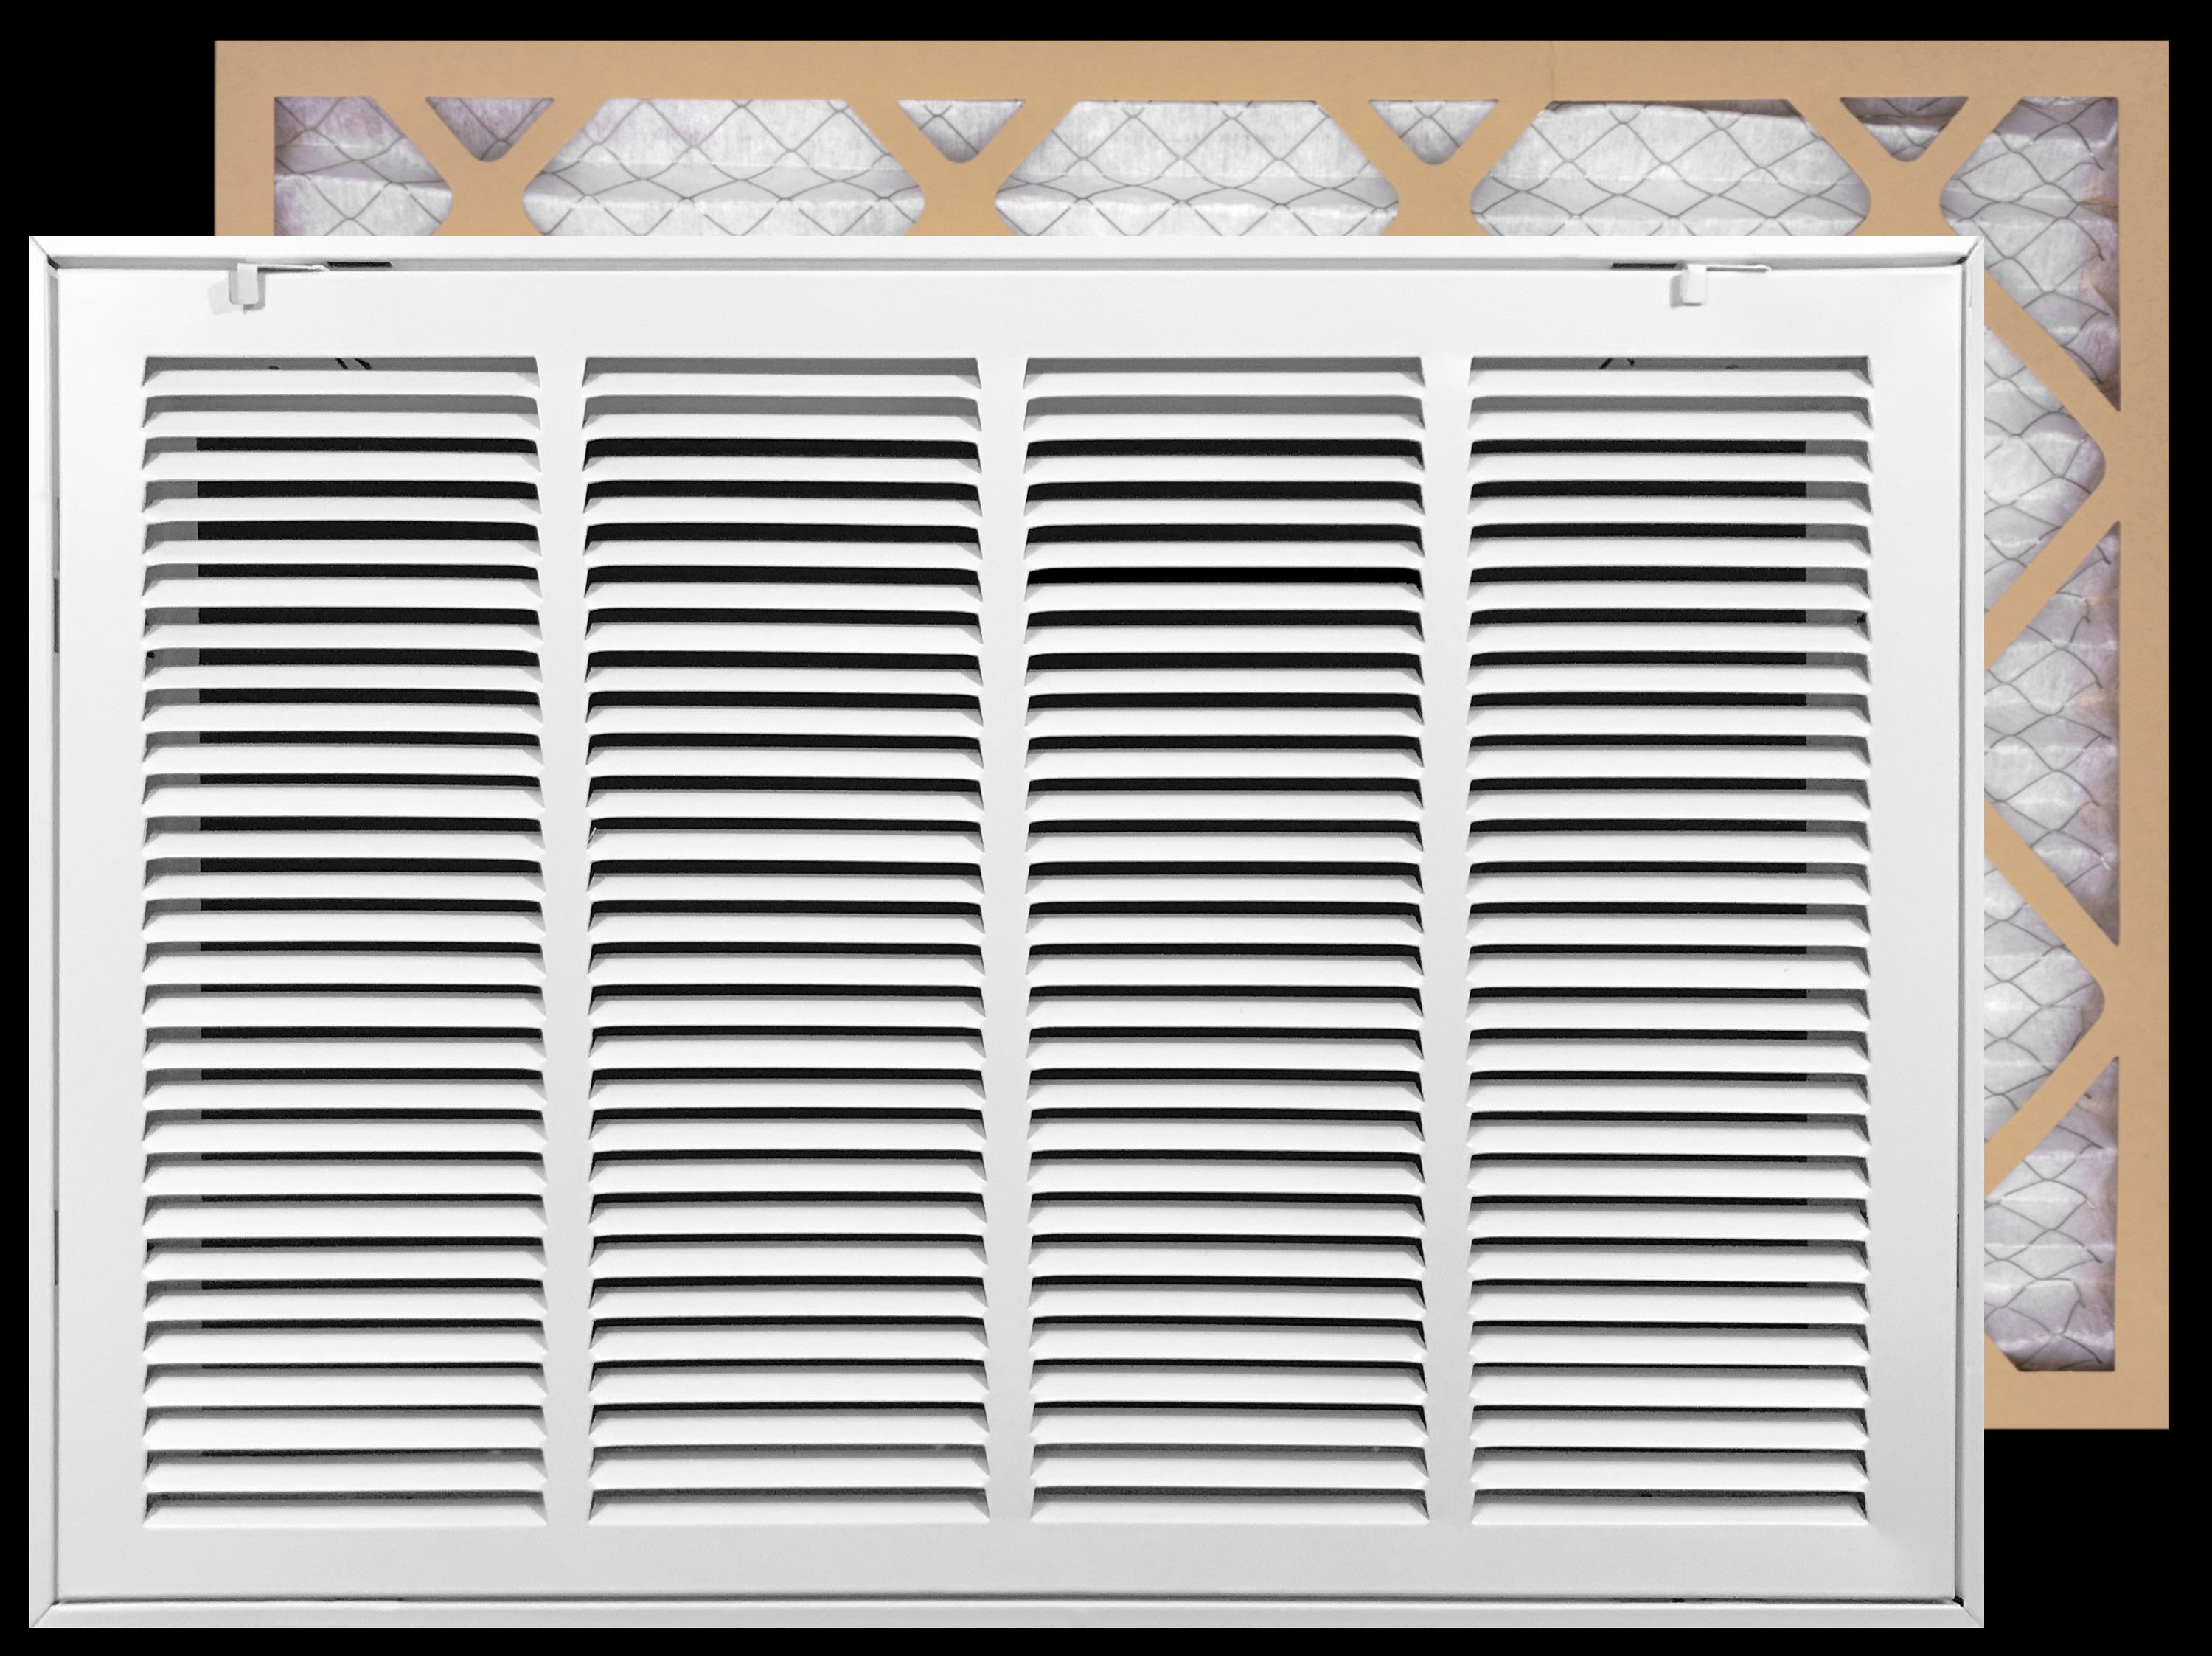 airgrilles 20" x 12" duct opening   filter included hd steel return air filter grille for sidewall and ceiling fil-7rafg1-wh-20x12 756014653090 - 1